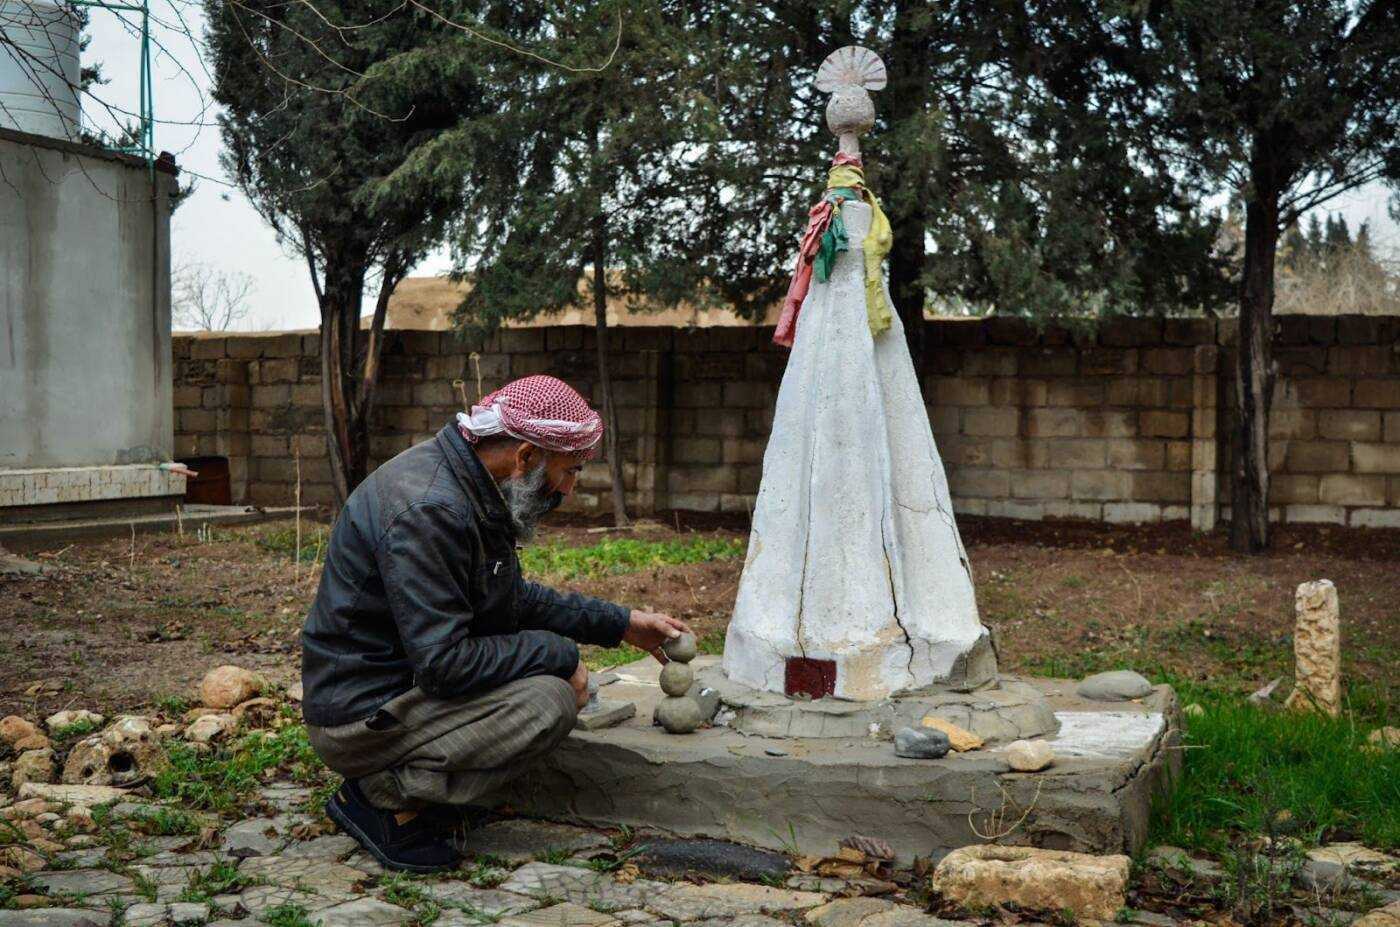 A Yazidi shrine in the garden of the Yazidi House organization, in the village of Qazlachokh in northeastern Syria’s Hasakah province, 6/2/2023 (Lyse Mauvais/Syria Direct)